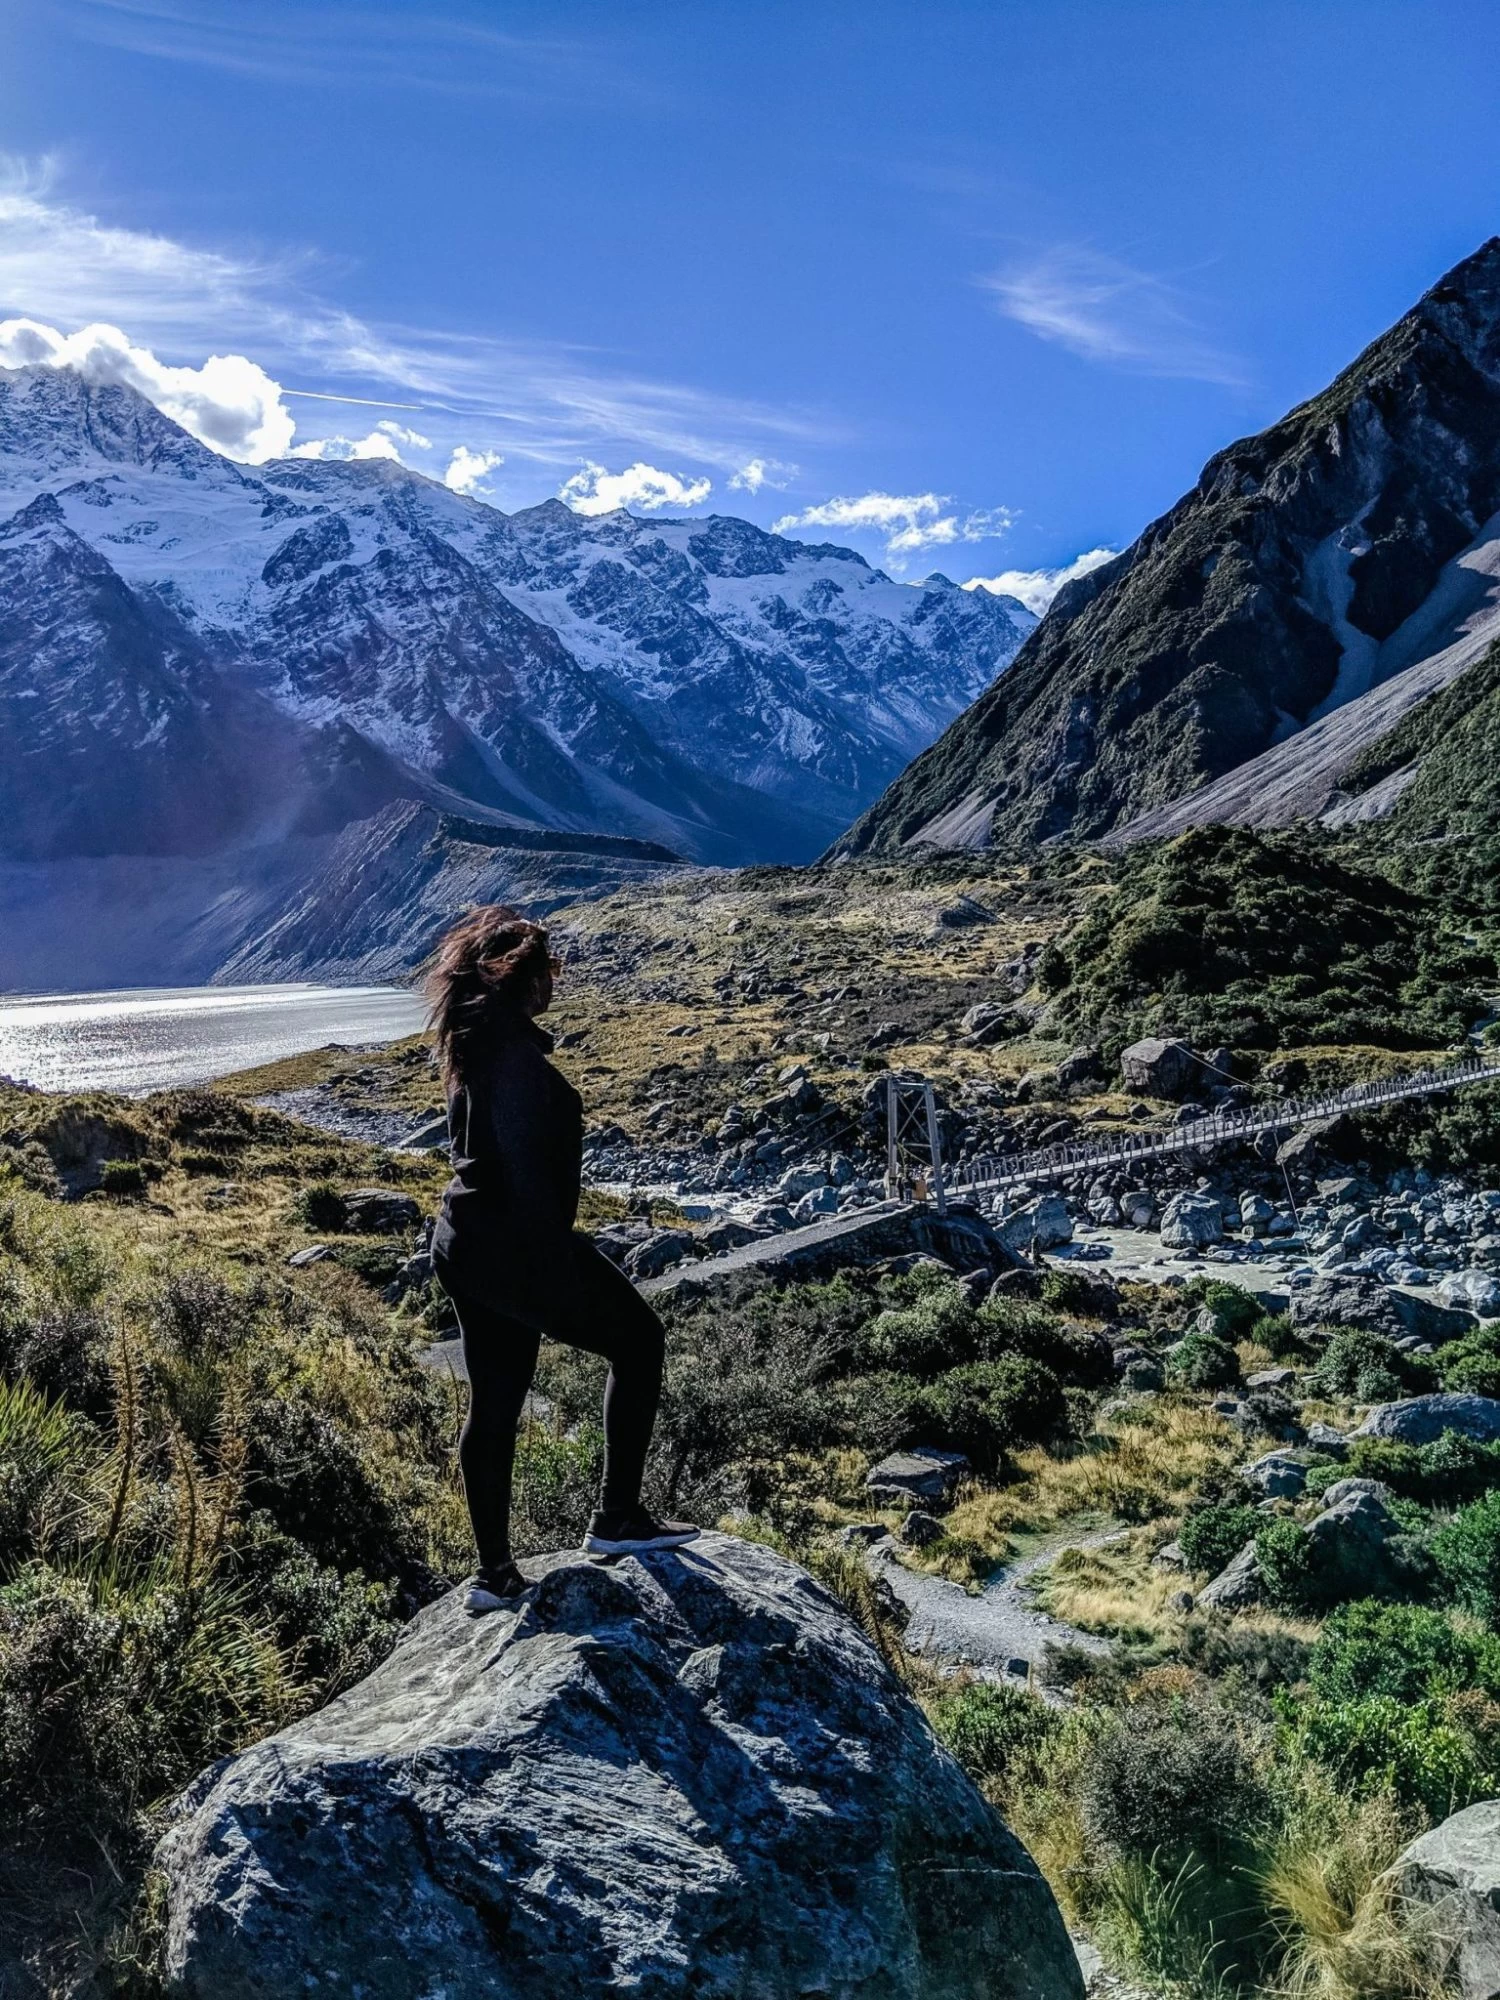 Taking in the full view of Mount Cook in New Zealand